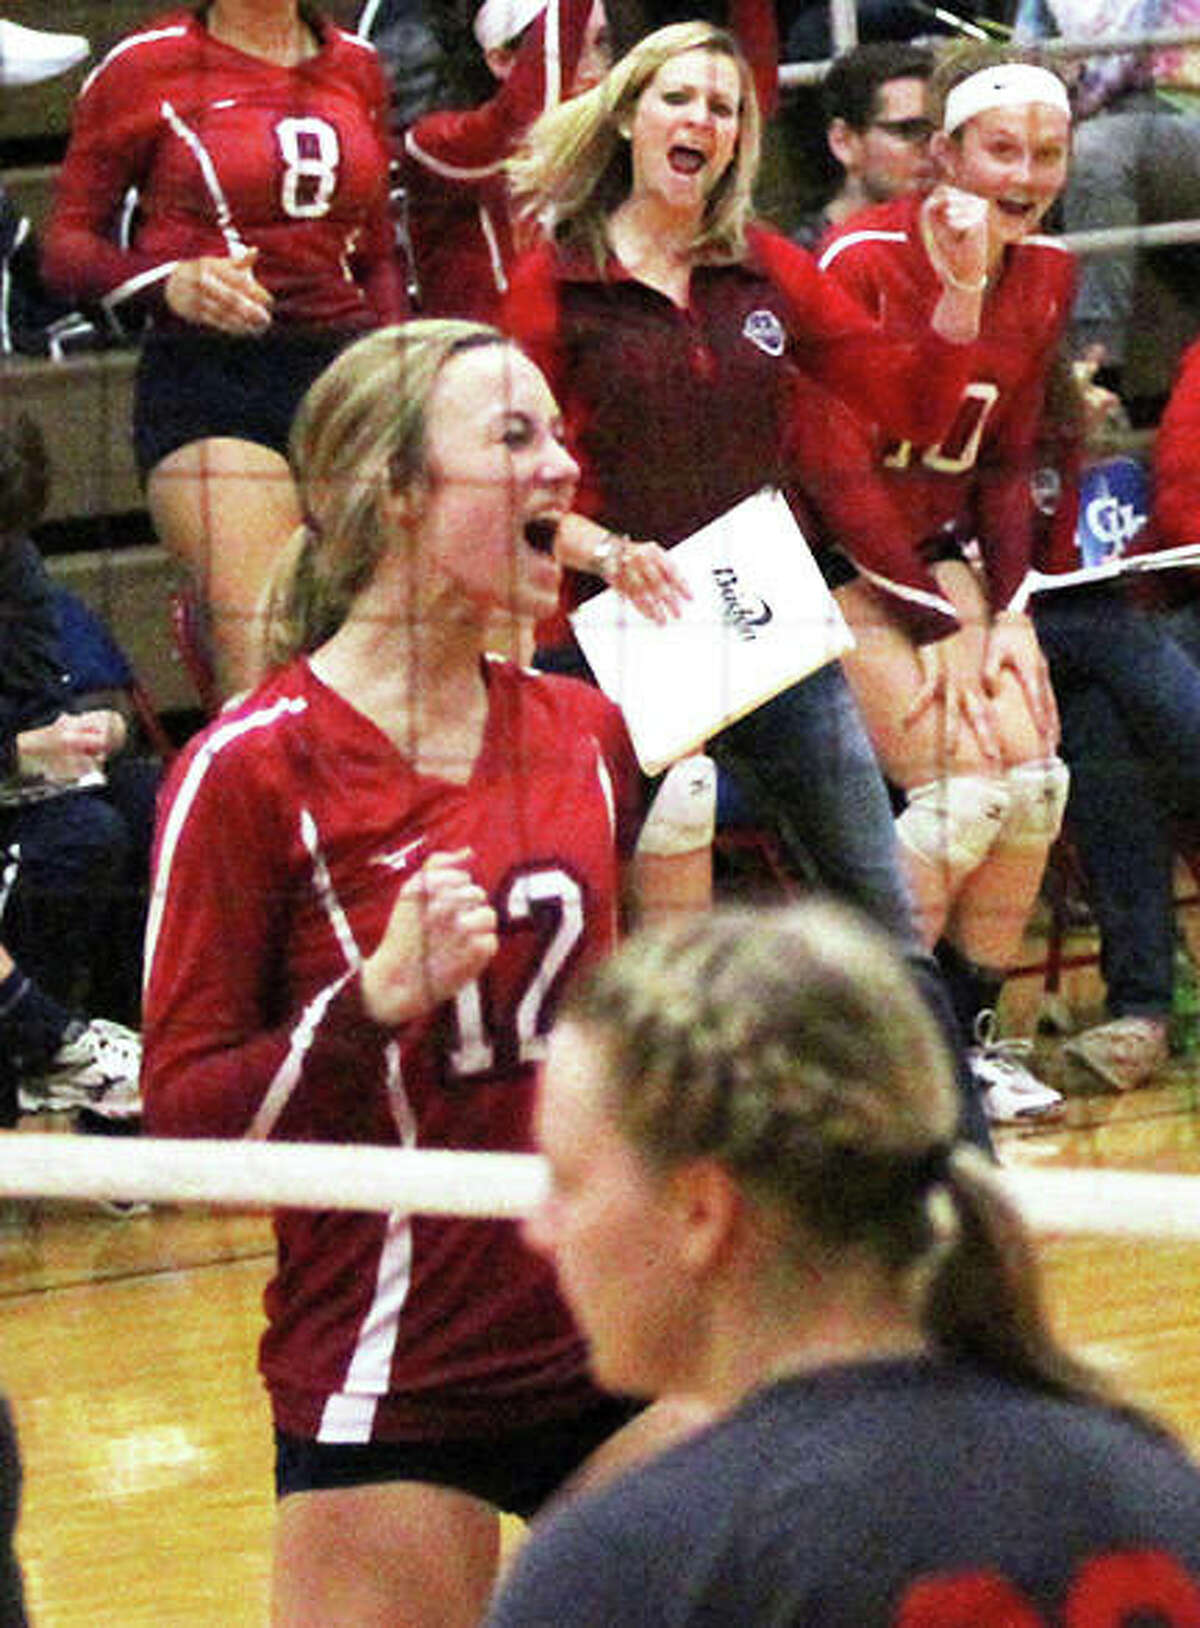 Carlinville’s Adriann Welte (12) and Cavaliers coach Kaitie Hammann (back) celebrate a point during a Macoupin County Tourney match against Staunton on Oct. 6 in Carlinville. Both the Cavs and the Bulldogs won Class 2A regional semifinals on Tuesday.